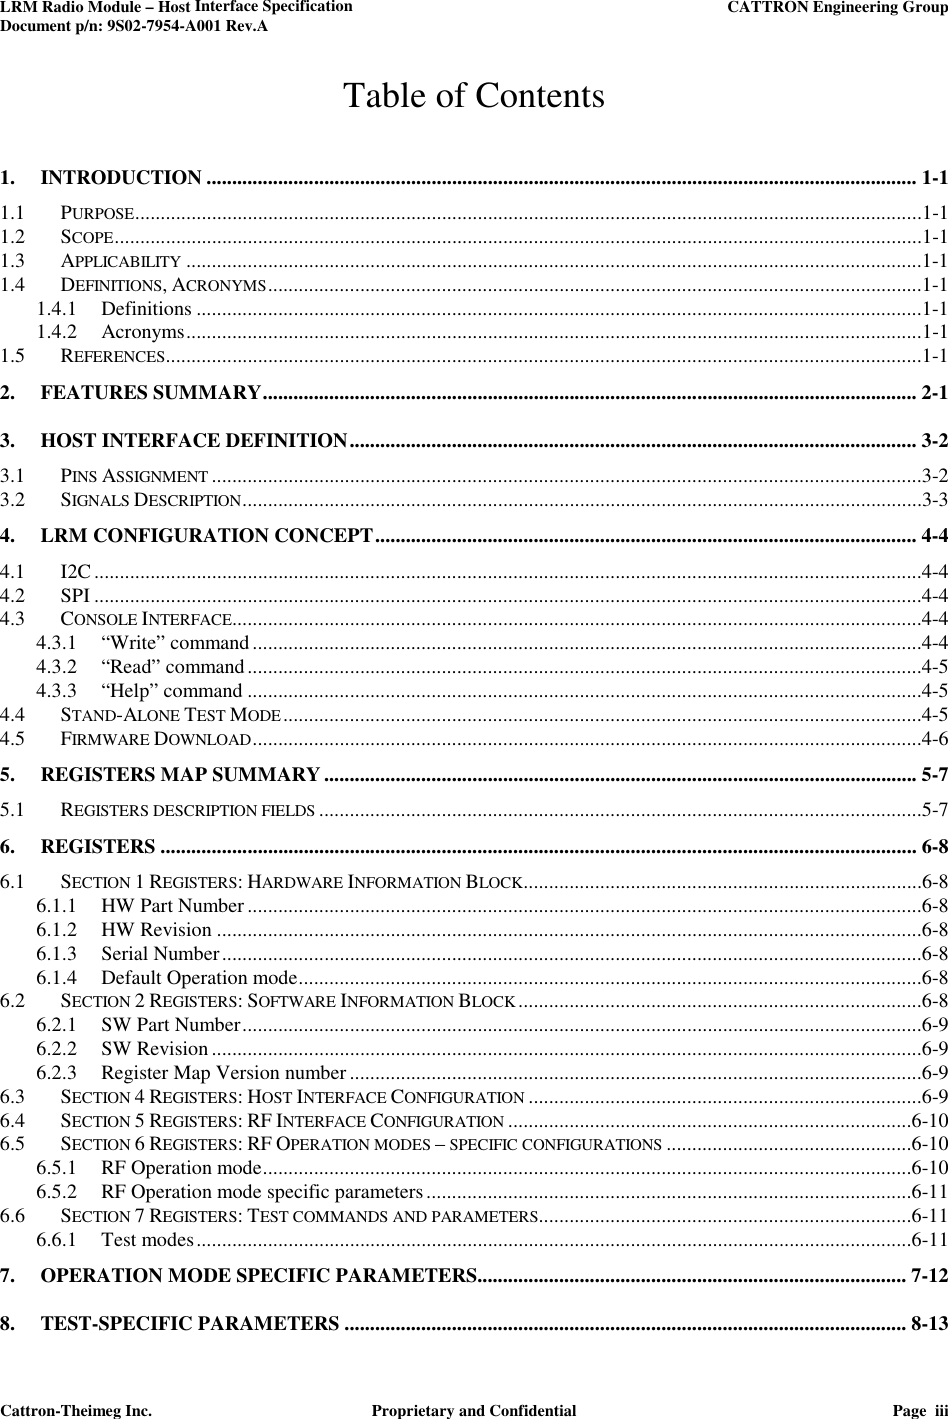 LRM Radio Module – Host Interface Specification     CATTRON Engineering Group Document p/n: 9S02-7954-A001 Rev.A   Cattron-Theimeg Inc.  Proprietary and Confidential  Page  iii  Table of Contents 1. INTRODUCTION ........................................................................................................................................... 1-1 1.1 PURPOSE ..........................................................................................................................................................1-1 1.2 SCOPE ..............................................................................................................................................................1-1 1.3 APPLICABILITY ................................................................................................................................................1-1 1.4 DEFINITIONS, ACRONYMS ................................................................................................................................1-1 1.4.1 Definitions ..............................................................................................................................................1-1 1.4.2 Acronyms ................................................................................................................................................1-1 1.5 REFERENCES ....................................................................................................................................................1-1 2. FEATURES SUMMARY ................................................................................................................................ 2-1 3. HOST INTERFACE DEFINITION ............................................................................................................... 3-2 3.1 PINS ASSIGNMENT ...........................................................................................................................................3-2 3.2 SIGNALS DESCRIPTION .....................................................................................................................................3-3 4. LRM CONFIGURATION CONCEPT .......................................................................................................... 4-4 4.1 I2C ..................................................................................................................................................................4-4 4.2 SPI ..................................................................................................................................................................4-4 4.3 CONSOLE INTERFACE.......................................................................................................................................4-4 4.3.1 “Write” command ...................................................................................................................................4-4 4.3.2 “Read” command ....................................................................................................................................4-5 4.3.3 “Help” command ....................................................................................................................................4-5 4.4 STAND-ALONE TEST MODE .............................................................................................................................4-5 4.5 FIRMWARE DOWNLOAD ...................................................................................................................................4-6 5. REGISTERS MAP SUMMARY .................................................................................................................... 5-7 5.1 REGISTERS DESCRIPTION FIELDS ......................................................................................................................5-7 6. REGISTERS .................................................................................................................................................... 6-8 6.1 SECTION 1 REGISTERS: HARDWARE INFORMATION BLOCK ..............................................................................6-8 6.1.1 HW Part Number ....................................................................................................................................6-8 6.1.2 HW Revision ..........................................................................................................................................6-8 6.1.3 Serial Number .........................................................................................................................................6-8 6.1.4 Default Operation mode ..........................................................................................................................6-8 6.2 SECTION 2 REGISTERS: SOFTWARE INFORMATION BLOCK ...............................................................................6-8 6.2.1 SW Part Number .....................................................................................................................................6-9 6.2.2 SW Revision ...........................................................................................................................................6-9 6.2.3 Register Map Version number ................................................................................................................6-9 6.3 SECTION 4 REGISTERS: HOST INTERFACE CONFIGURATION .............................................................................6-9 6.4 SECTION 5 REGISTERS: RF INTERFACE CONFIGURATION ...............................................................................6-10 6.5 SECTION 6 REGISTERS: RF OPERATION MODES – SPECIFIC CONFIGURATIONS ................................................6-10 6.5.1 RF Operation mode ...............................................................................................................................6-10 6.5.2 RF Operation mode specific parameters ...............................................................................................6-11 6.6 SECTION 7 REGISTERS: TEST COMMANDS AND PARAMETERS.........................................................................6-11 6.6.1 Test modes ............................................................................................................................................6-11 7. OPERATION MODE SPECIFIC PARAMETERS.................................................................................... 7-12 8. TEST-SPECIFIC PARAMETERS .............................................................................................................. 8-13 